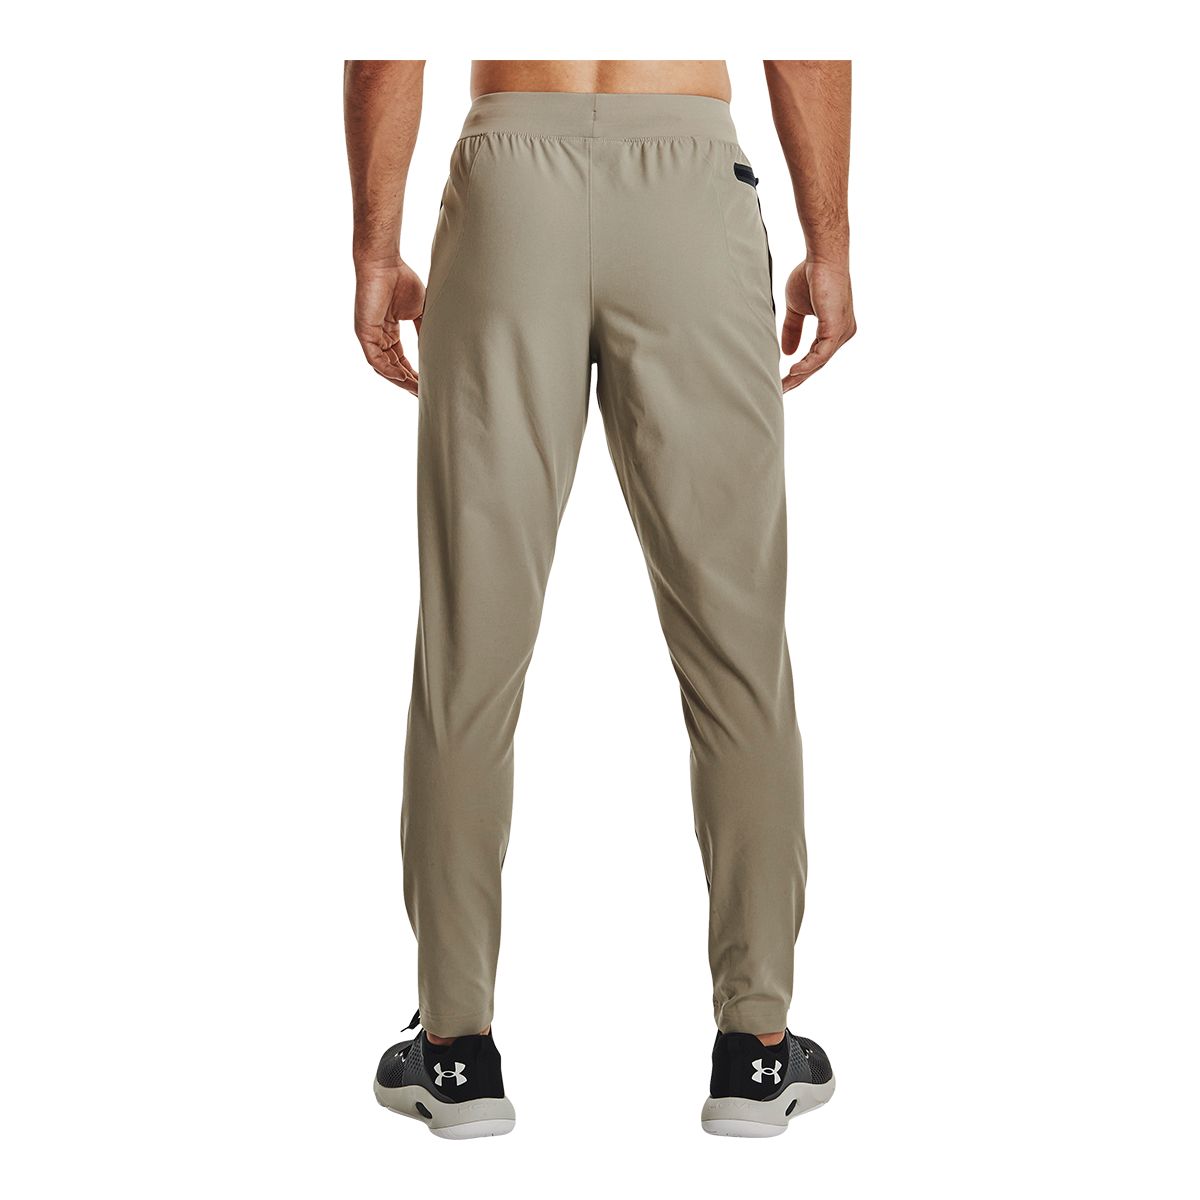 Under Armour Men's Meridian Tapered Pants